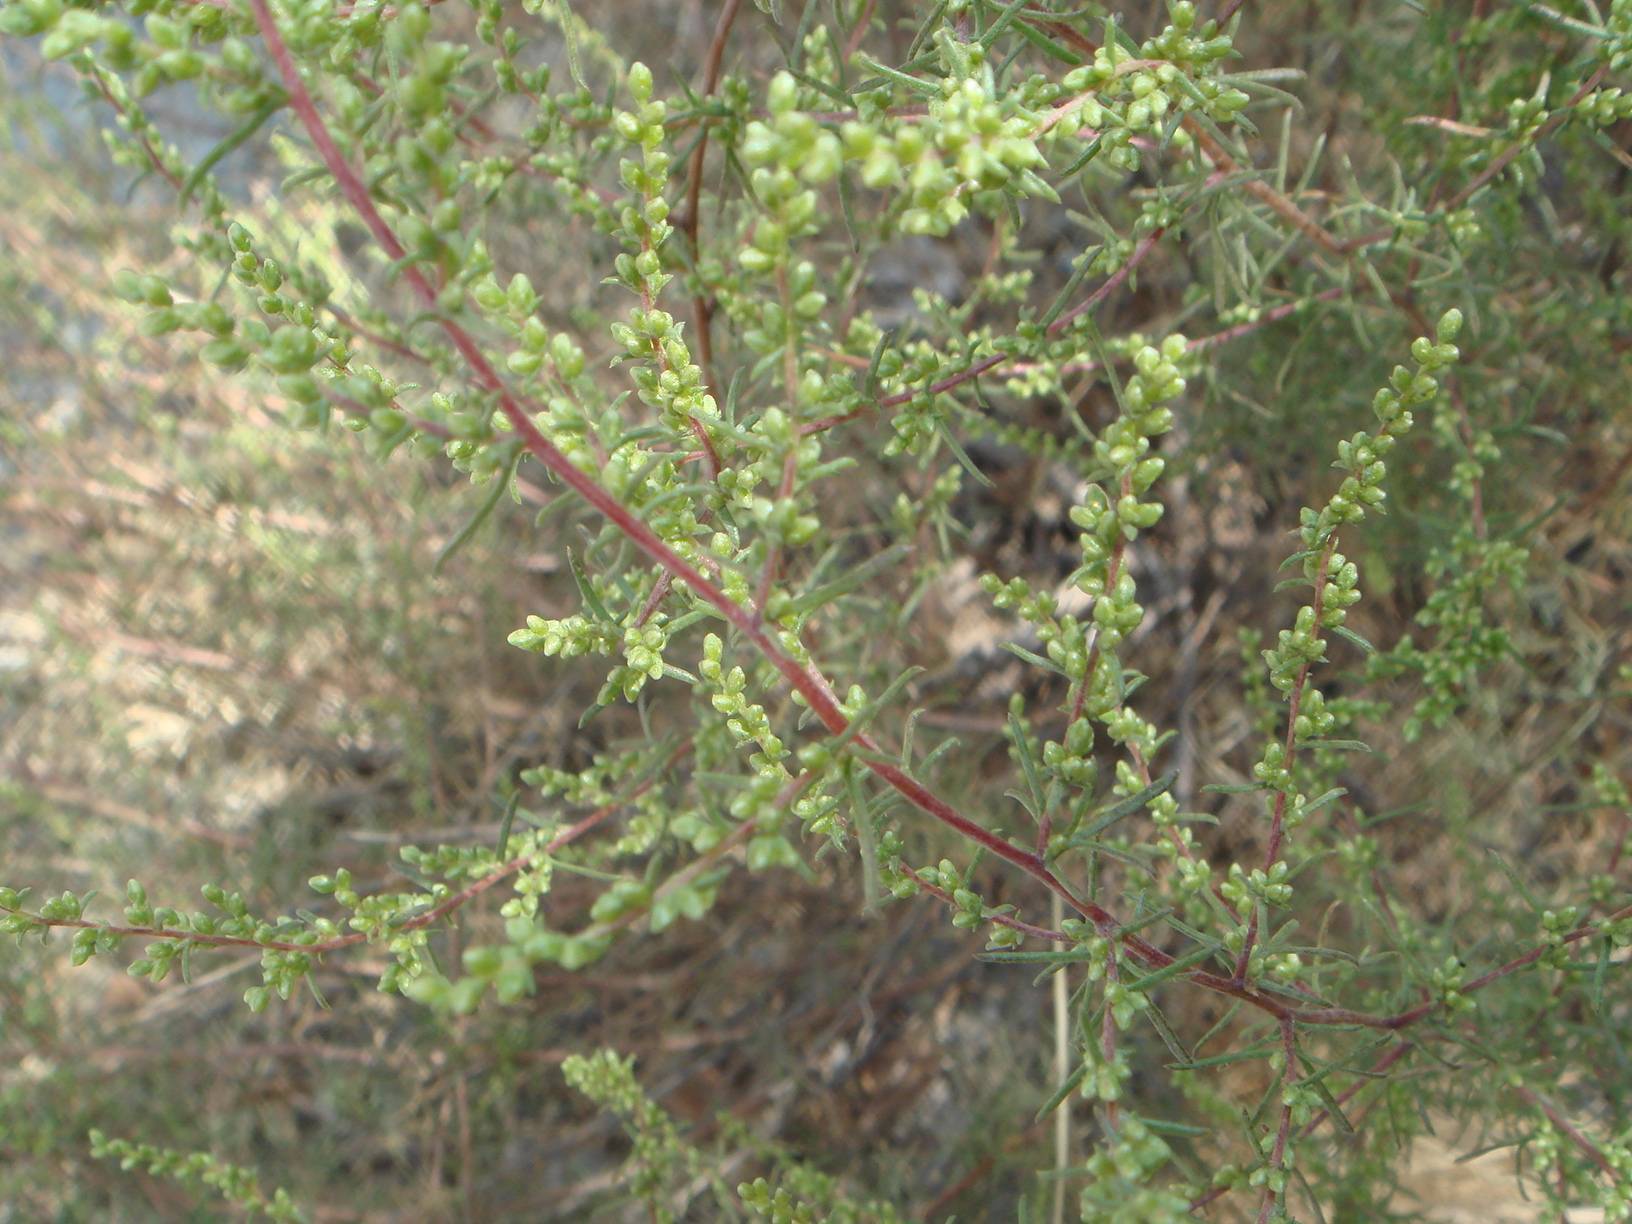 lime fruits and green foliage on red-brown stems